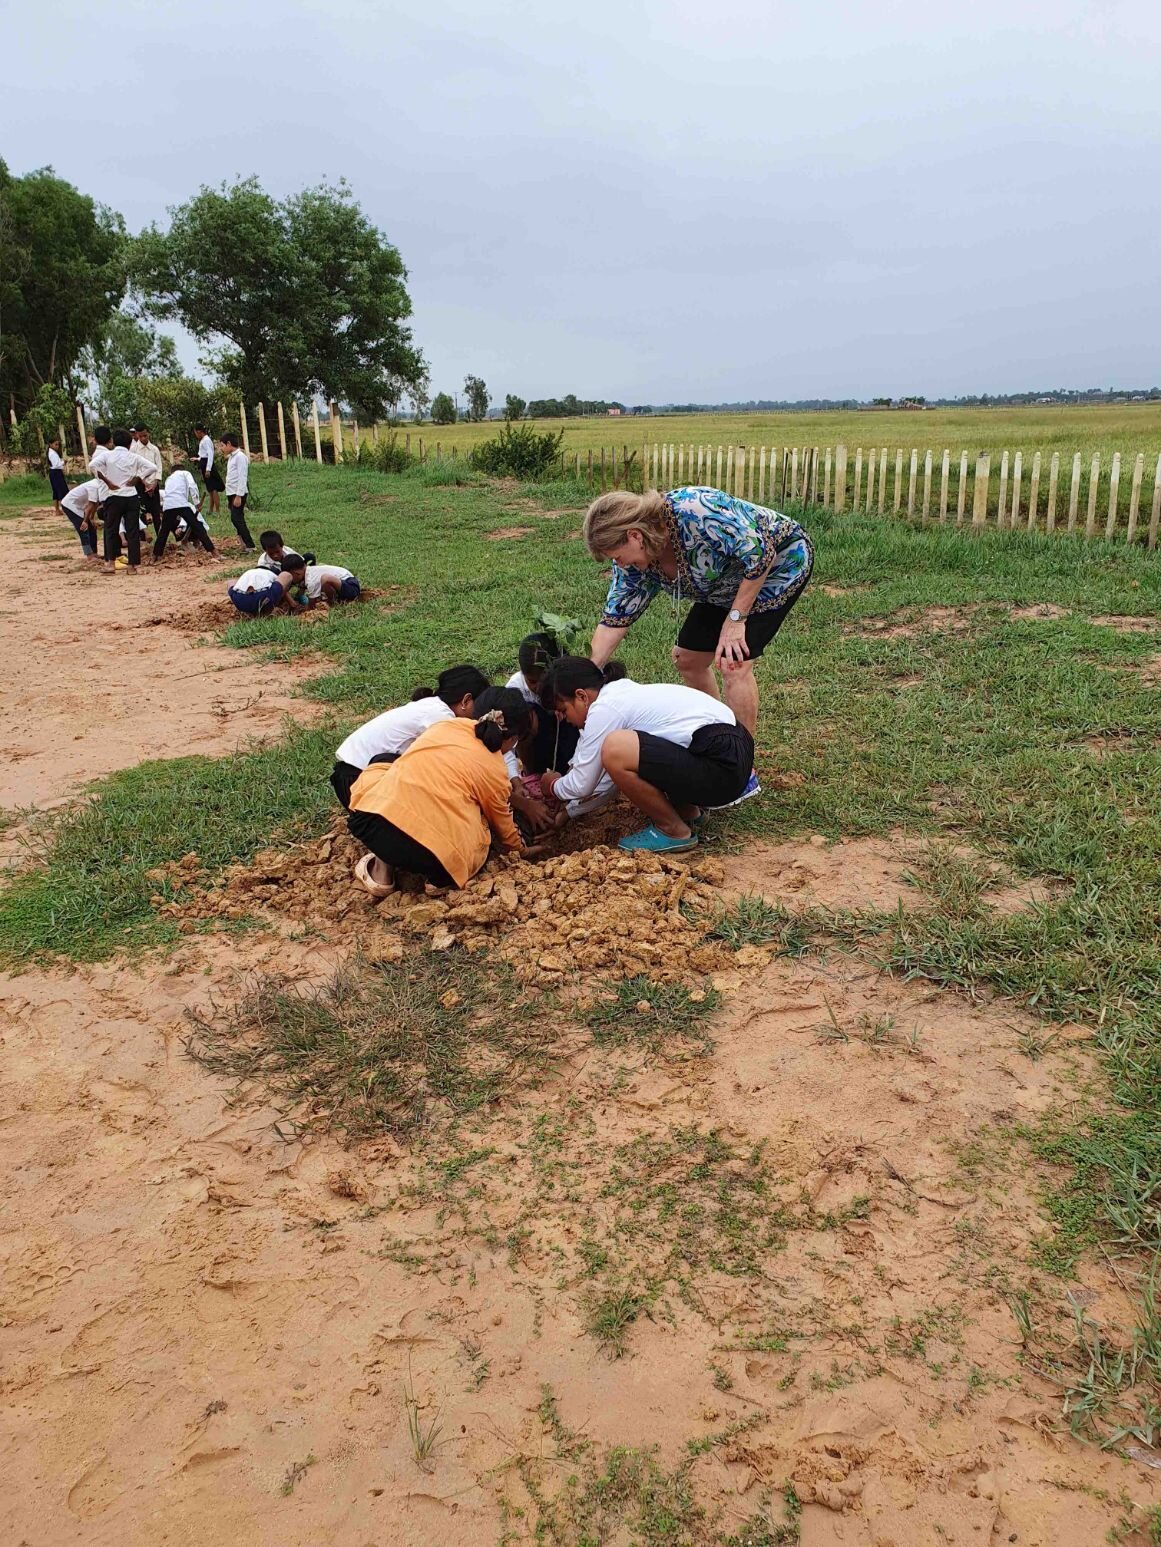 rotary-president-tree-planting-with-students.jpg